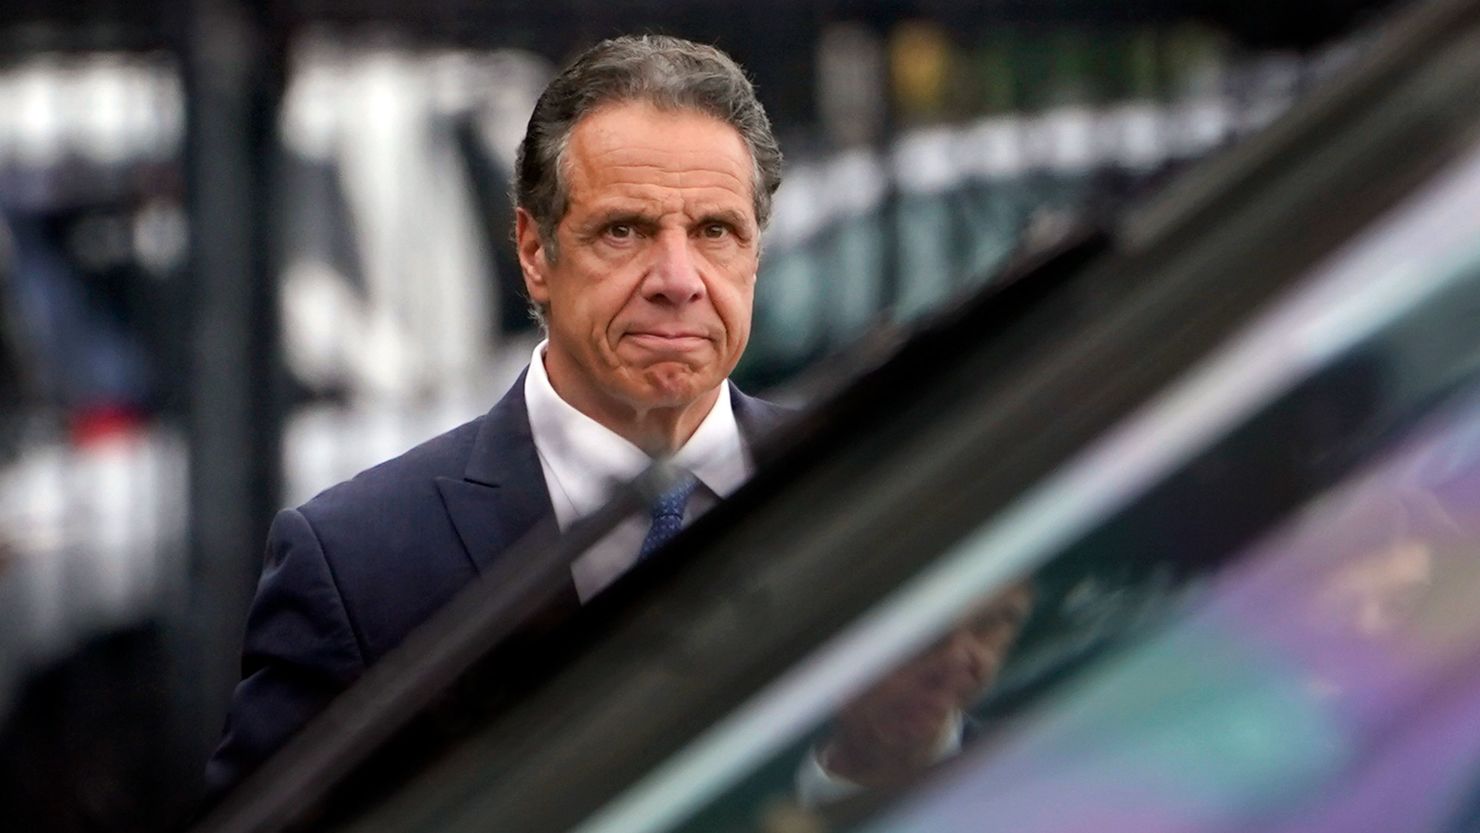 New York Gov. Andrew Cuomo prepares to board a helicopter after announcing his resignation on Aug. 10, 2021, in New York.